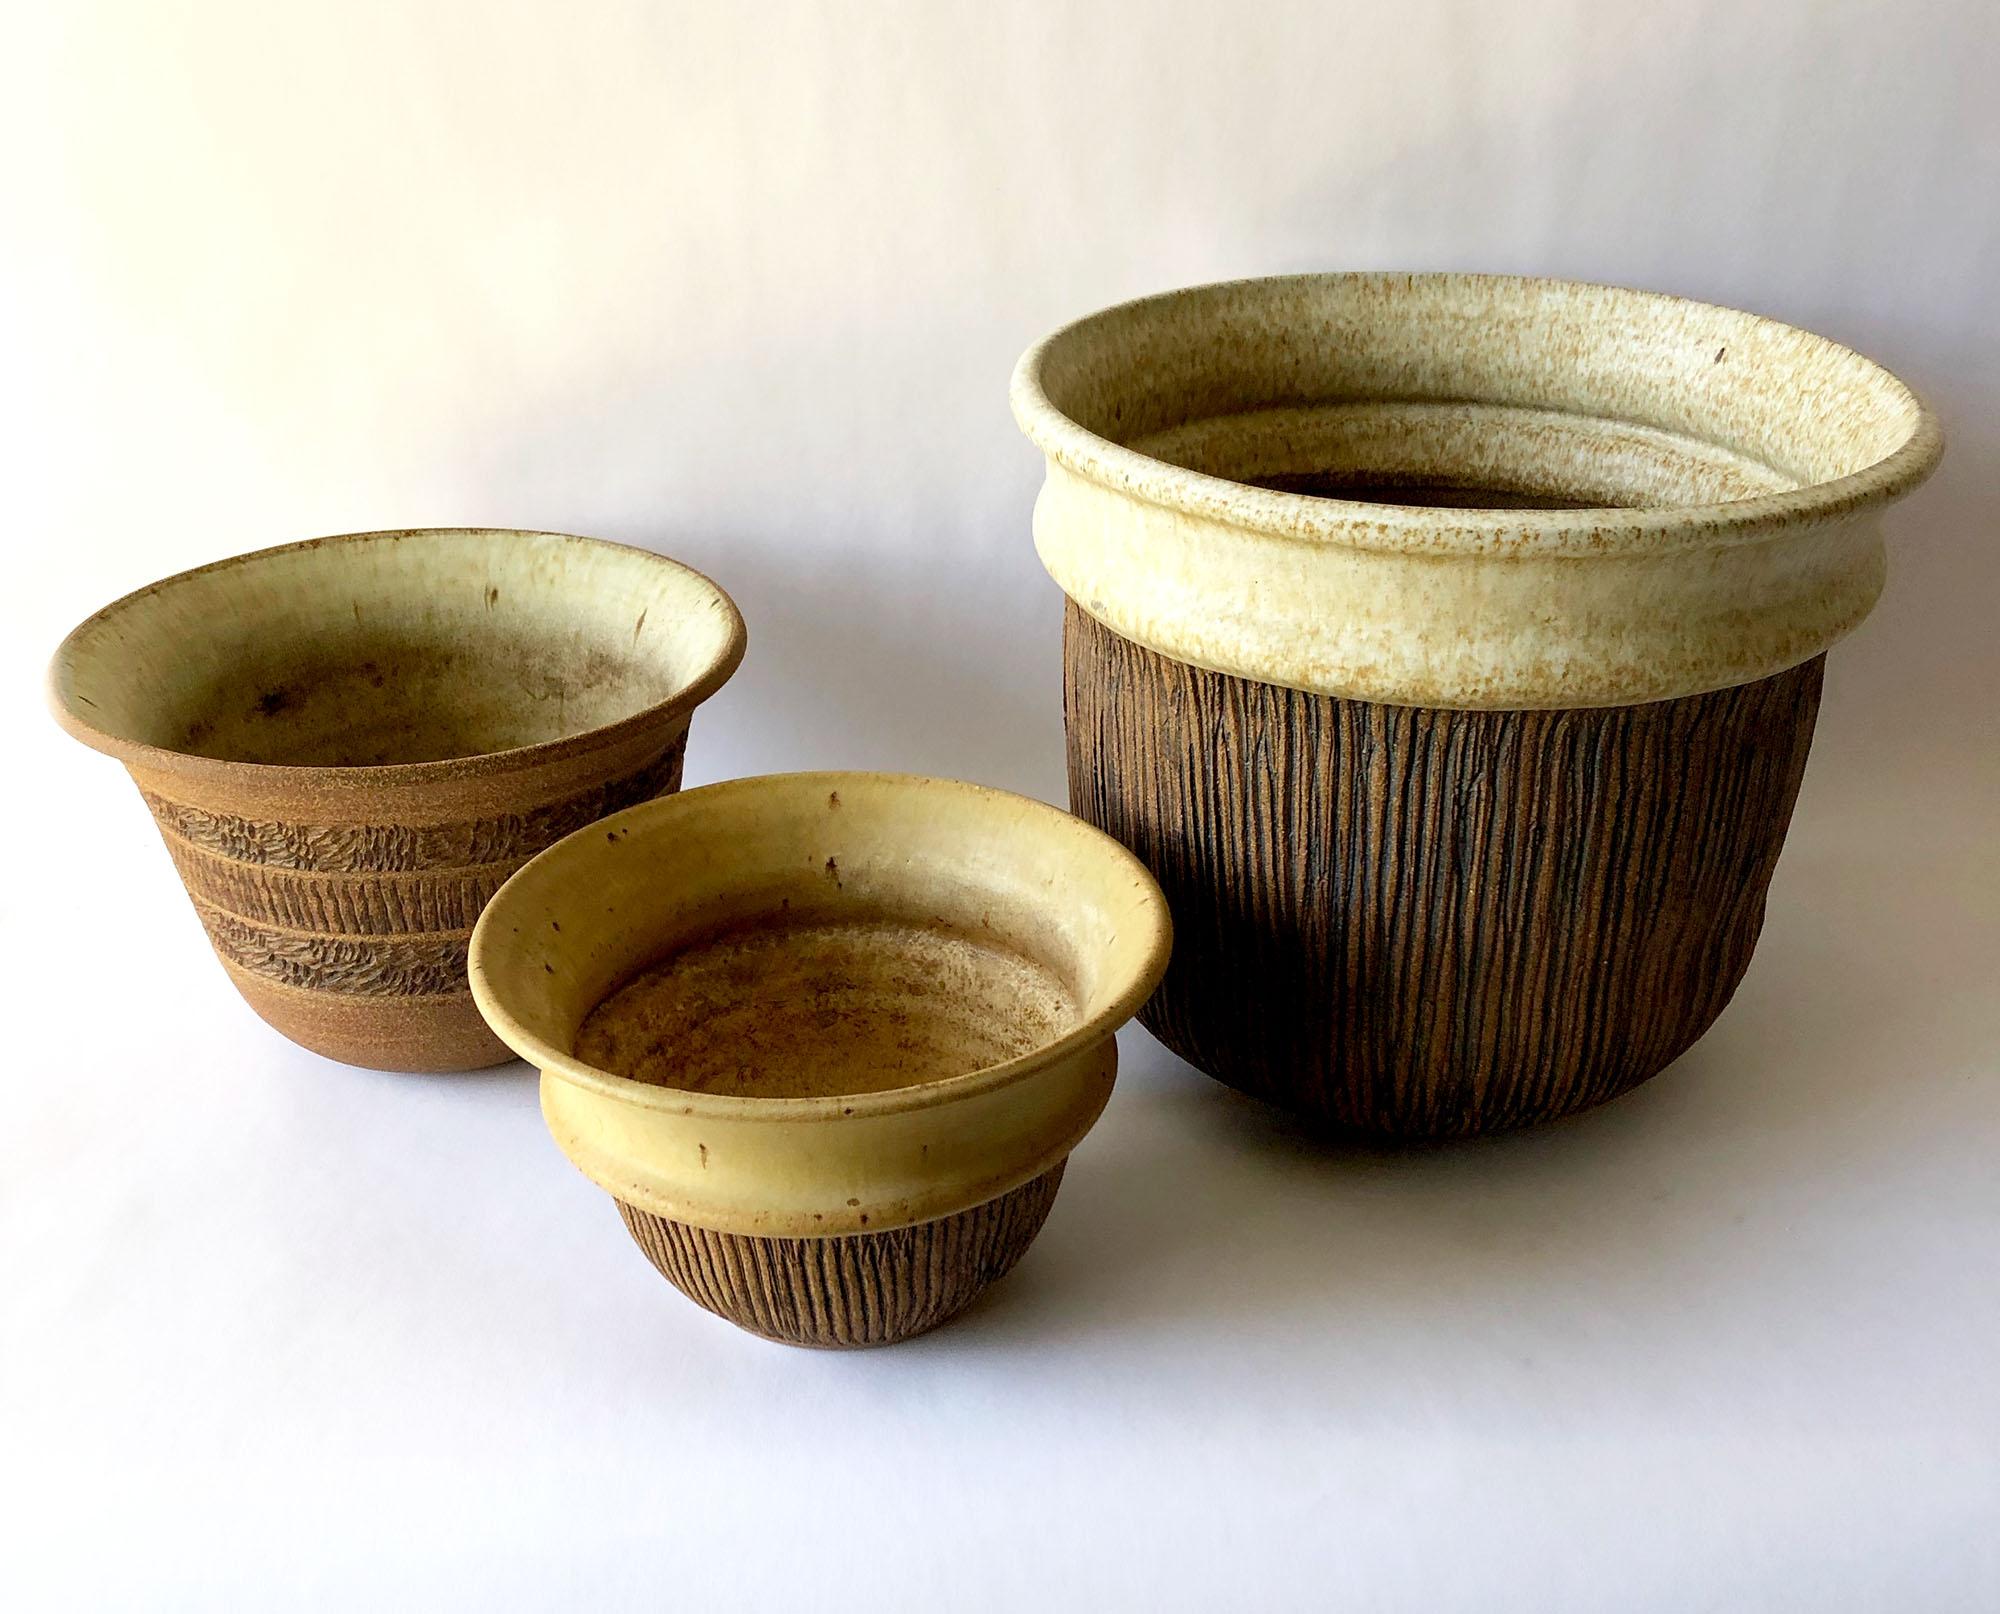 Handmade trio of planters created by Anne Goldman of California. Large planter measures 11.5